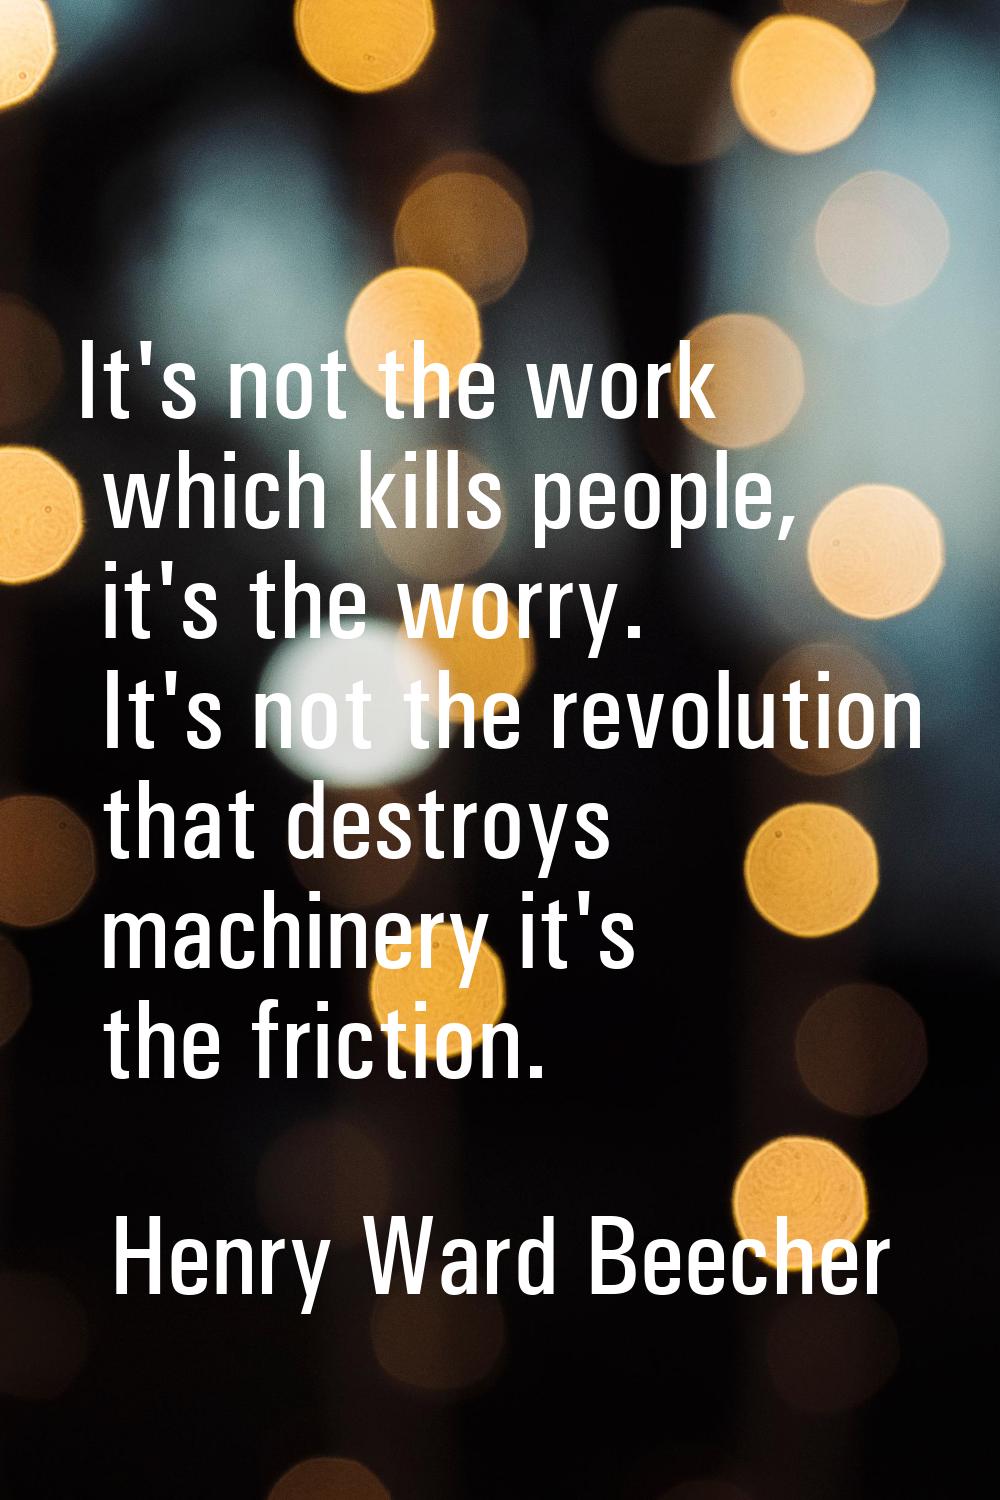 It's not the work which kills people, it's the worry. It's not the revolution that destroys machine